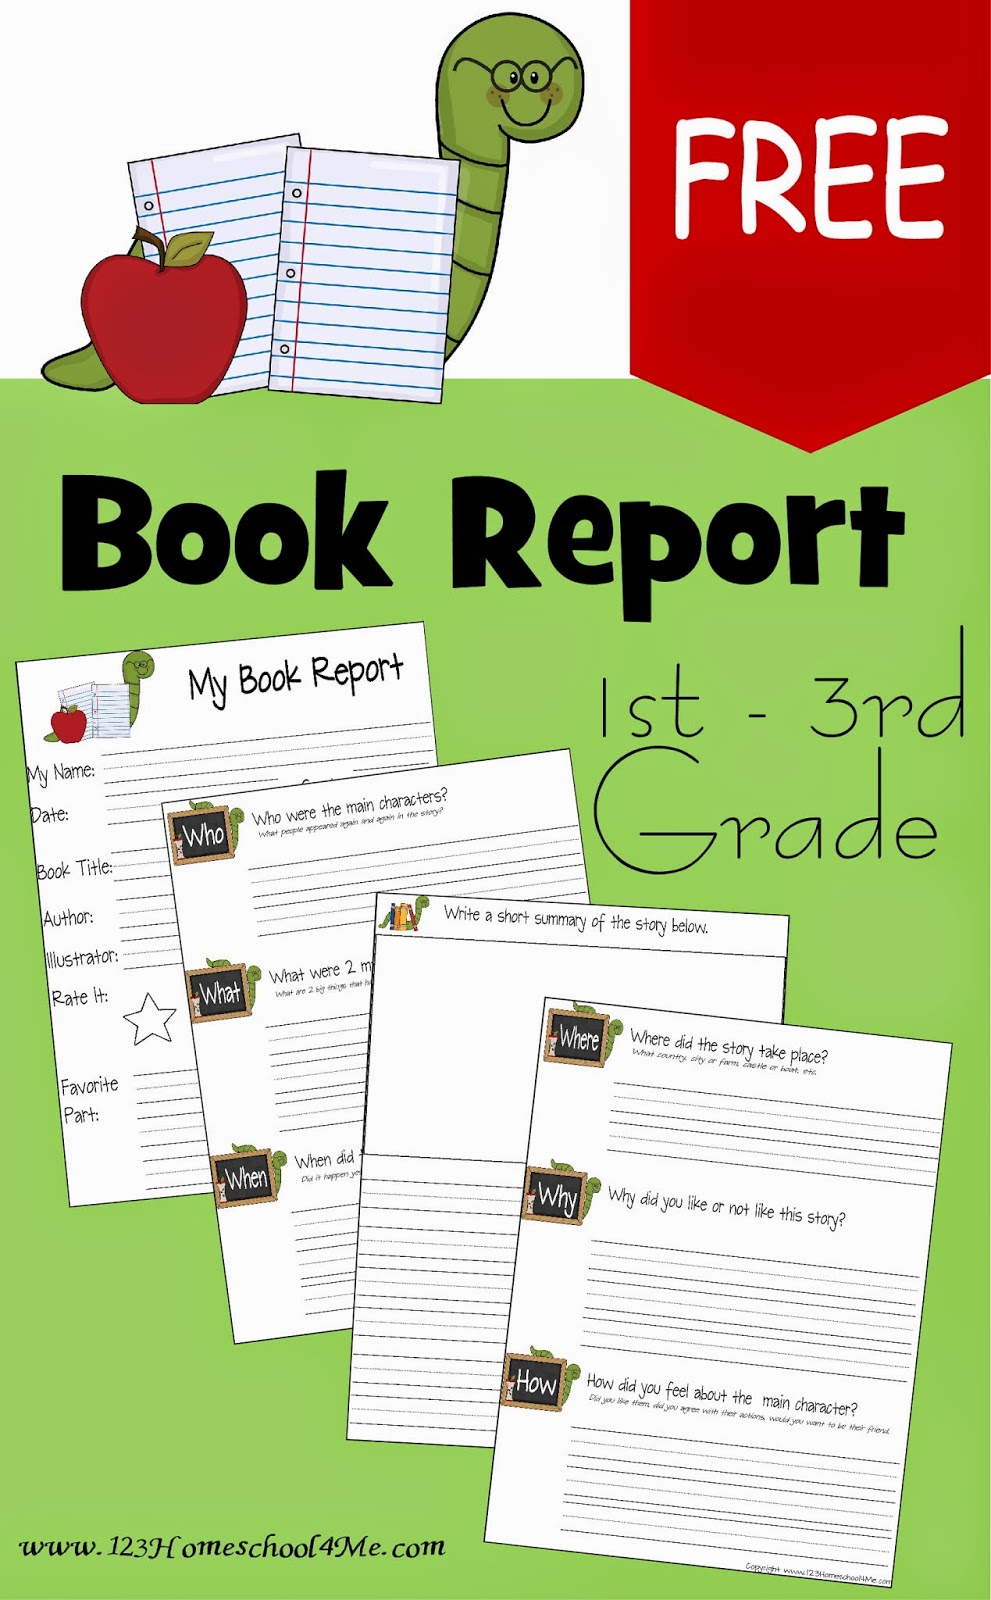 FREE Book Report Template - Educational Freebies With Regard To Second Grade Book Report Template